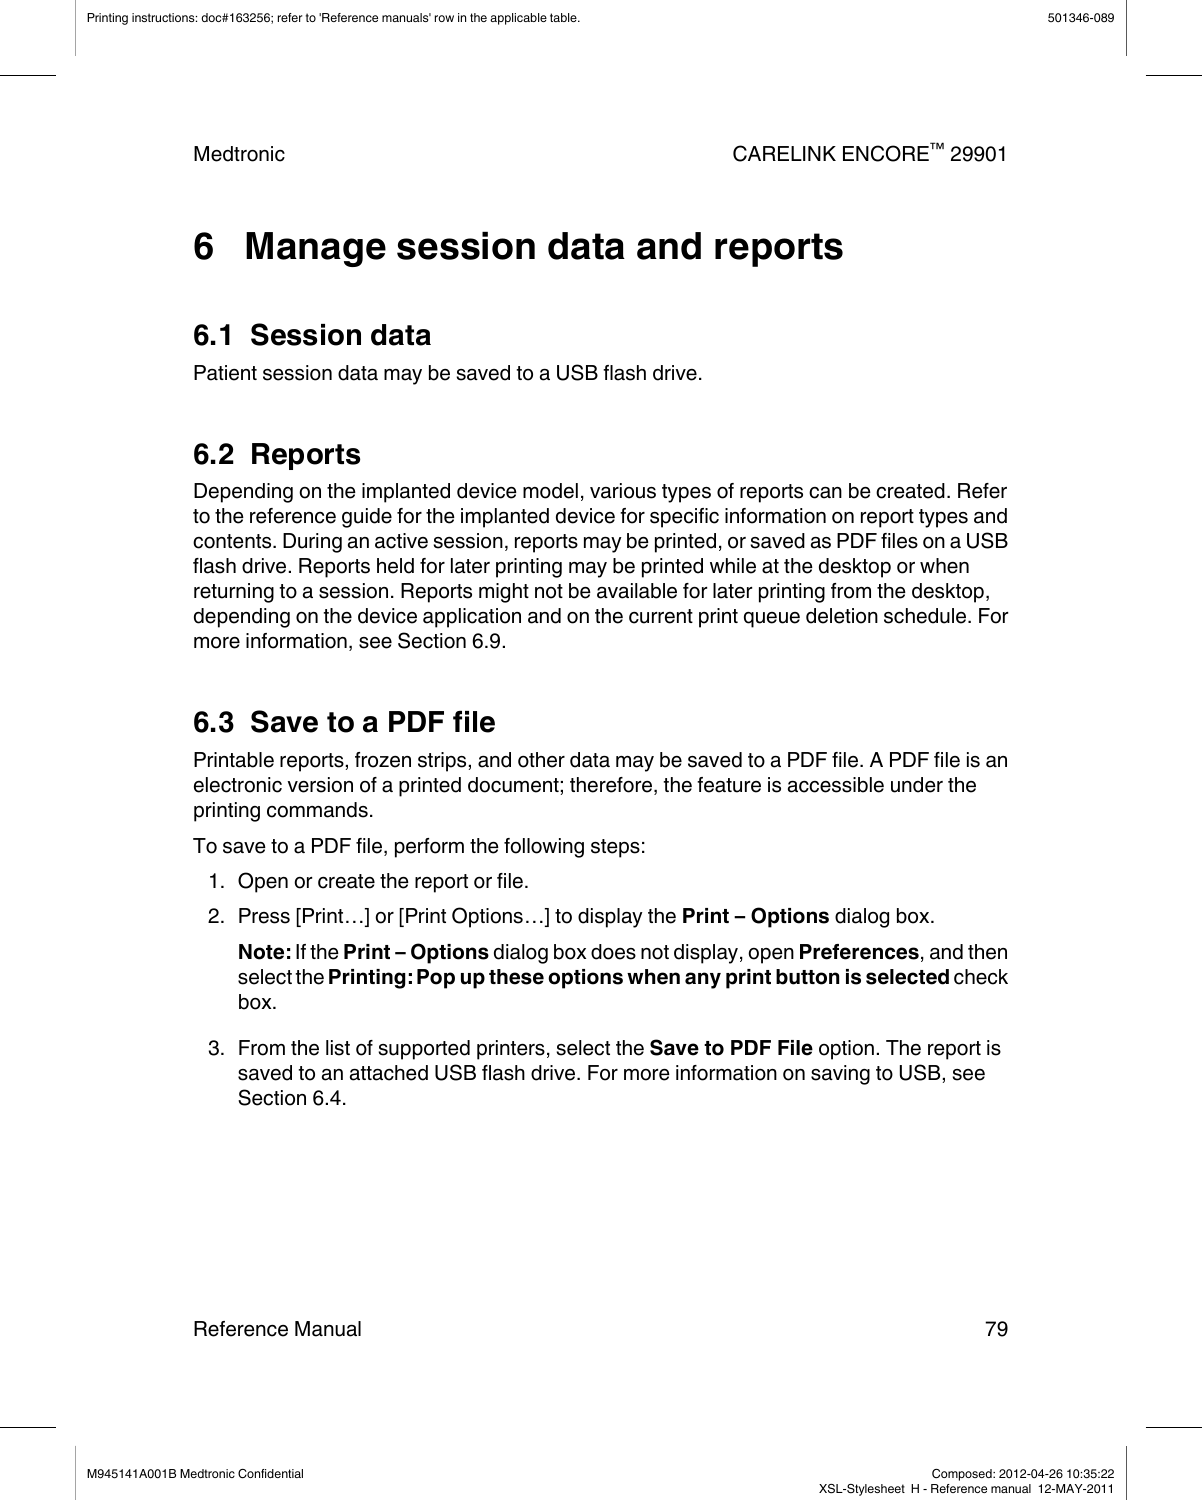 6   Manage session data and reports6.1  Session dataPatient session data may be saved to a USB flash drive.6.2  ReportsDepending on the implanted device model, various types of reports can be created. Referto the reference guide for the implanted device for specific information on report types andcontents. During an active session, reports may be printed, or saved as PDF files on a USBflash drive. Reports held for later printing may be printed while at the desktop or whenreturning to a session. Reports might not be available for later printing from the desktop,depending on the device application and on the current print queue deletion schedule. Formore information, see Section 6.9.6.3  Save to a PDF filePrintable reports, frozen strips, and other data may be saved to a PDF file. A PDF file is anelectronic version of a printed document; therefore, the feature is accessible under theprinting commands.To save to a PDF file, perform the following steps:1. Open or create the report or file.2. Press [Print…] or [Print Options…] to display the Print – Options dialog box.Note: If the Print – Options dialog box does not display, open Preferences, and thenselect the Printing: Pop up these options when any print button is selected checkbox.3. From the list of supported printers, select the Save to PDF File option. The report issaved to an attached USB flash drive. For more information on saving to USB, seeSection 6.4.Printing instructions: doc#163256; refer to &apos;Reference manuals&apos; row in the applicable table. 501346-089Medtronic CARELINK ENCORE™ 29901Reference Manual 79M945141A001B Medtronic Confidential   Composed: 2012-04-26 10:35:22XSL-Stylesheet  H - Reference manual  12-MAY-2011